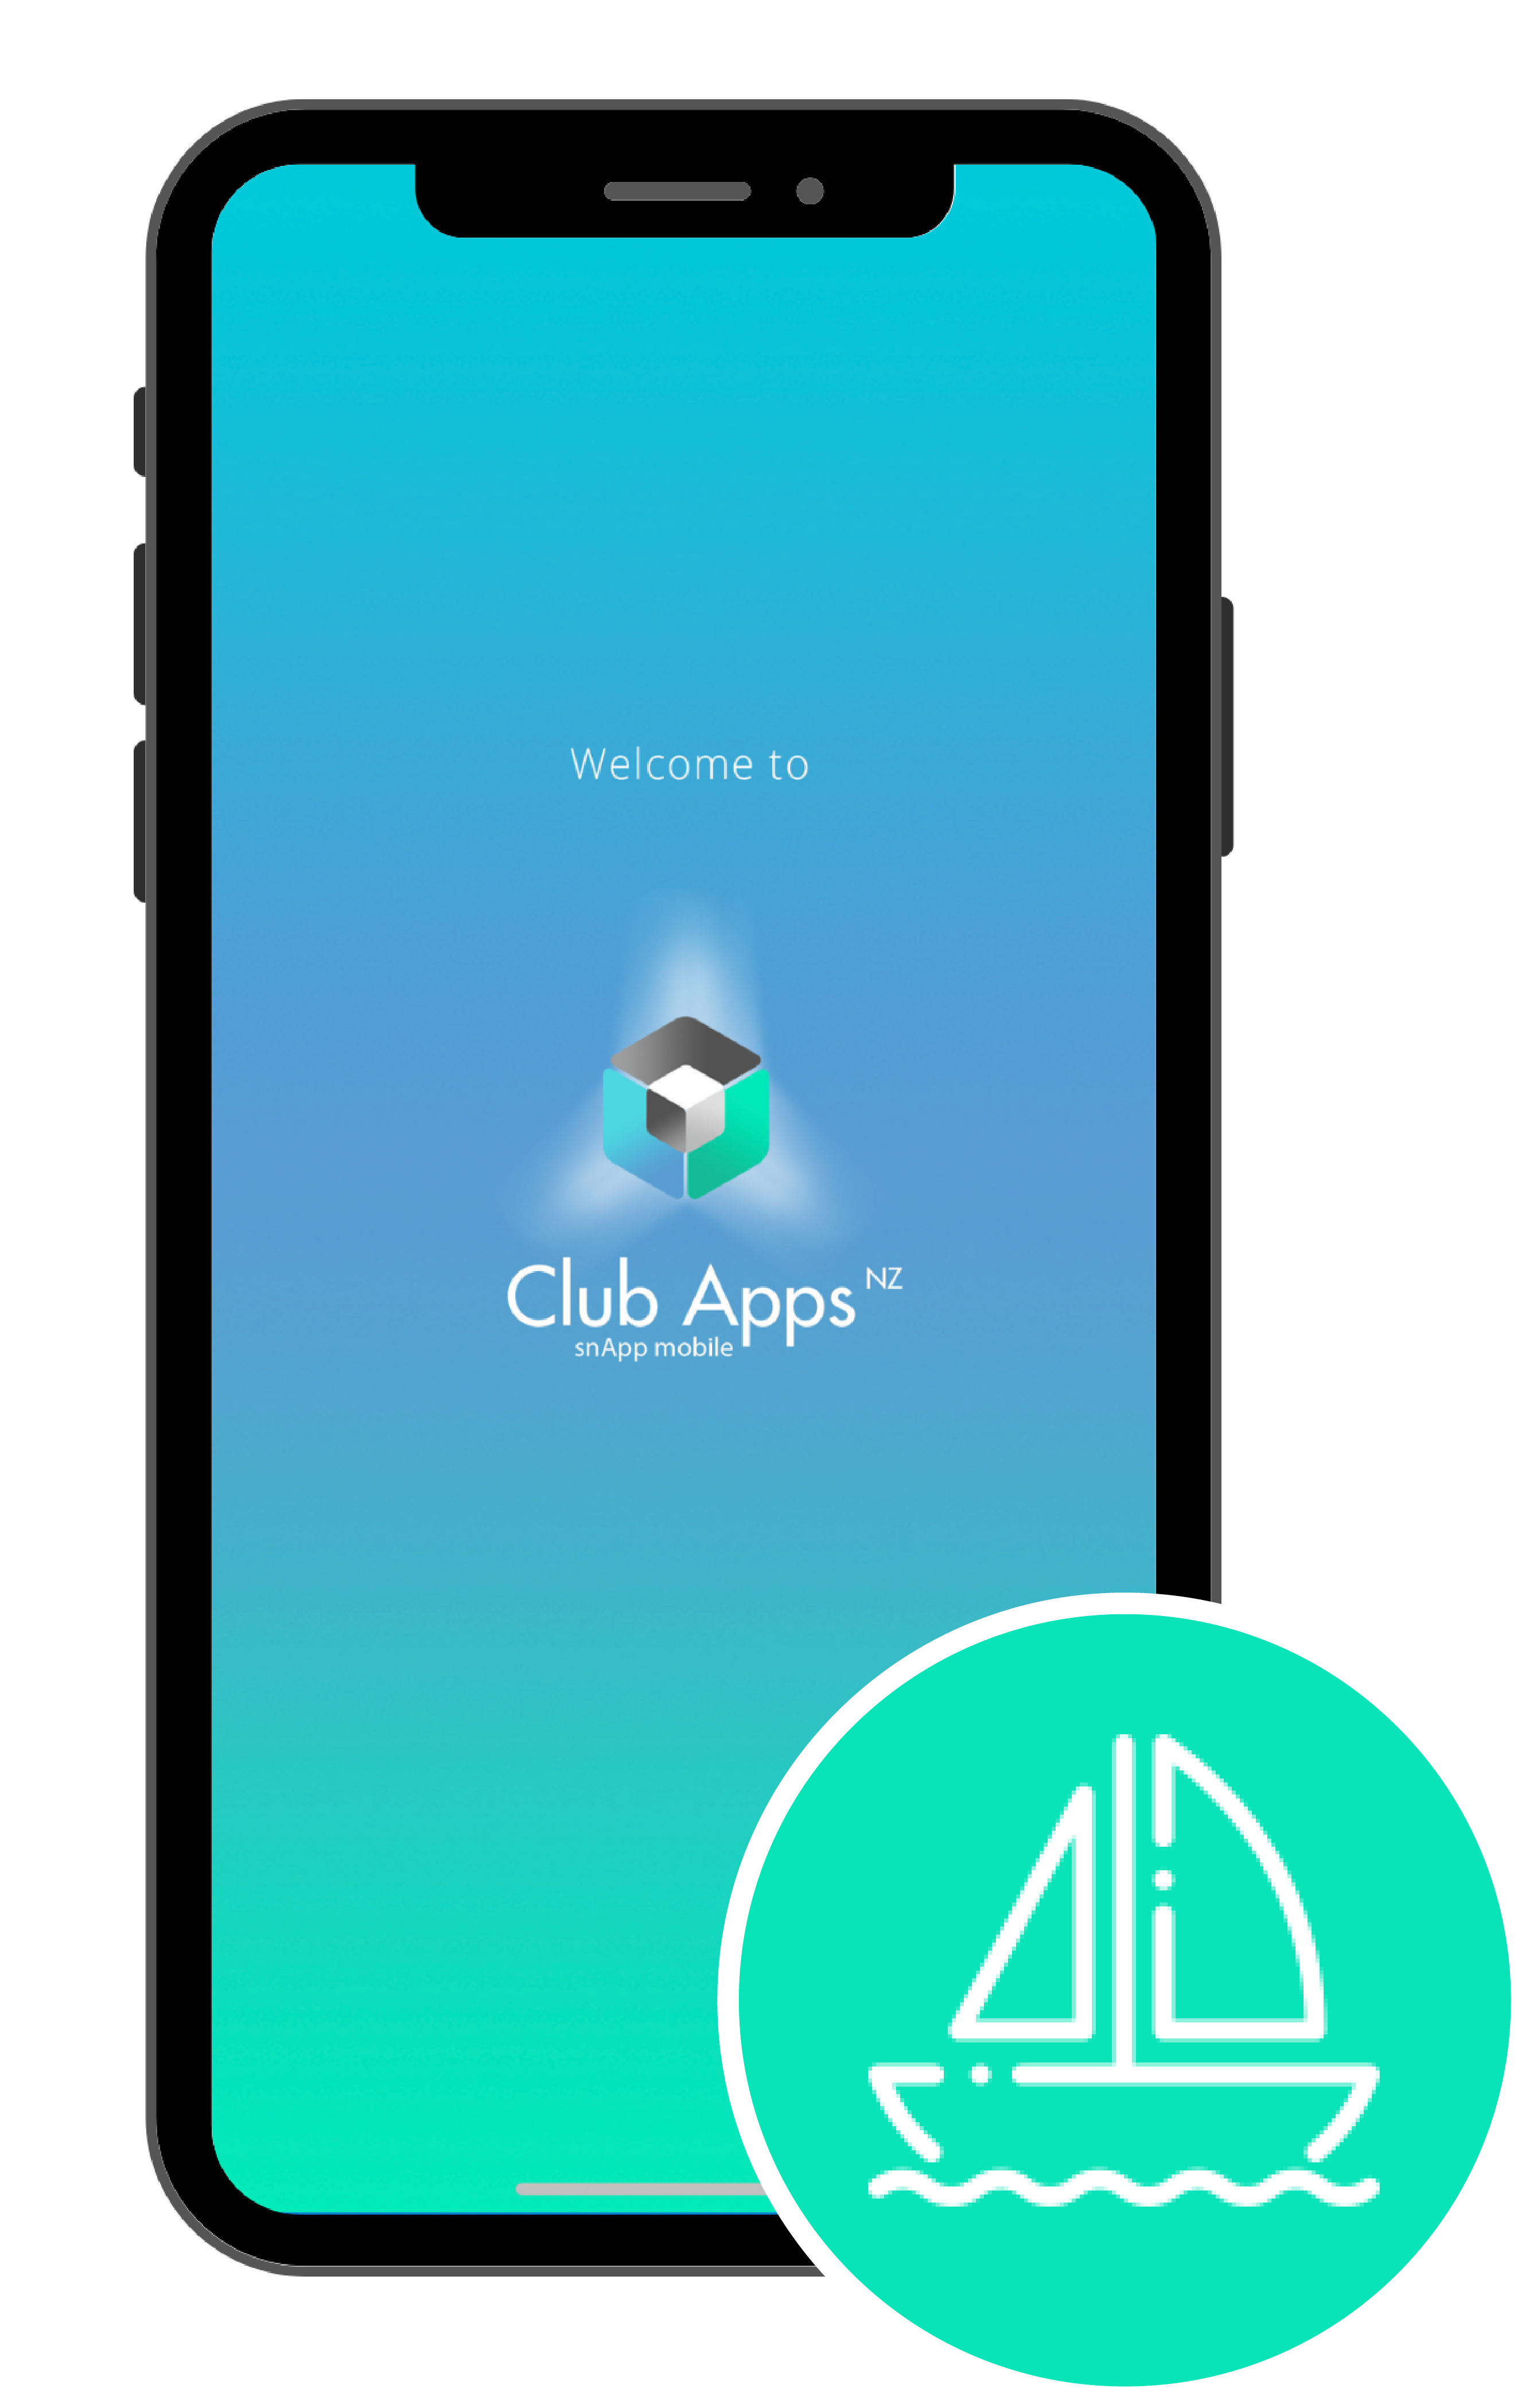 Club apps demo on mobile phone